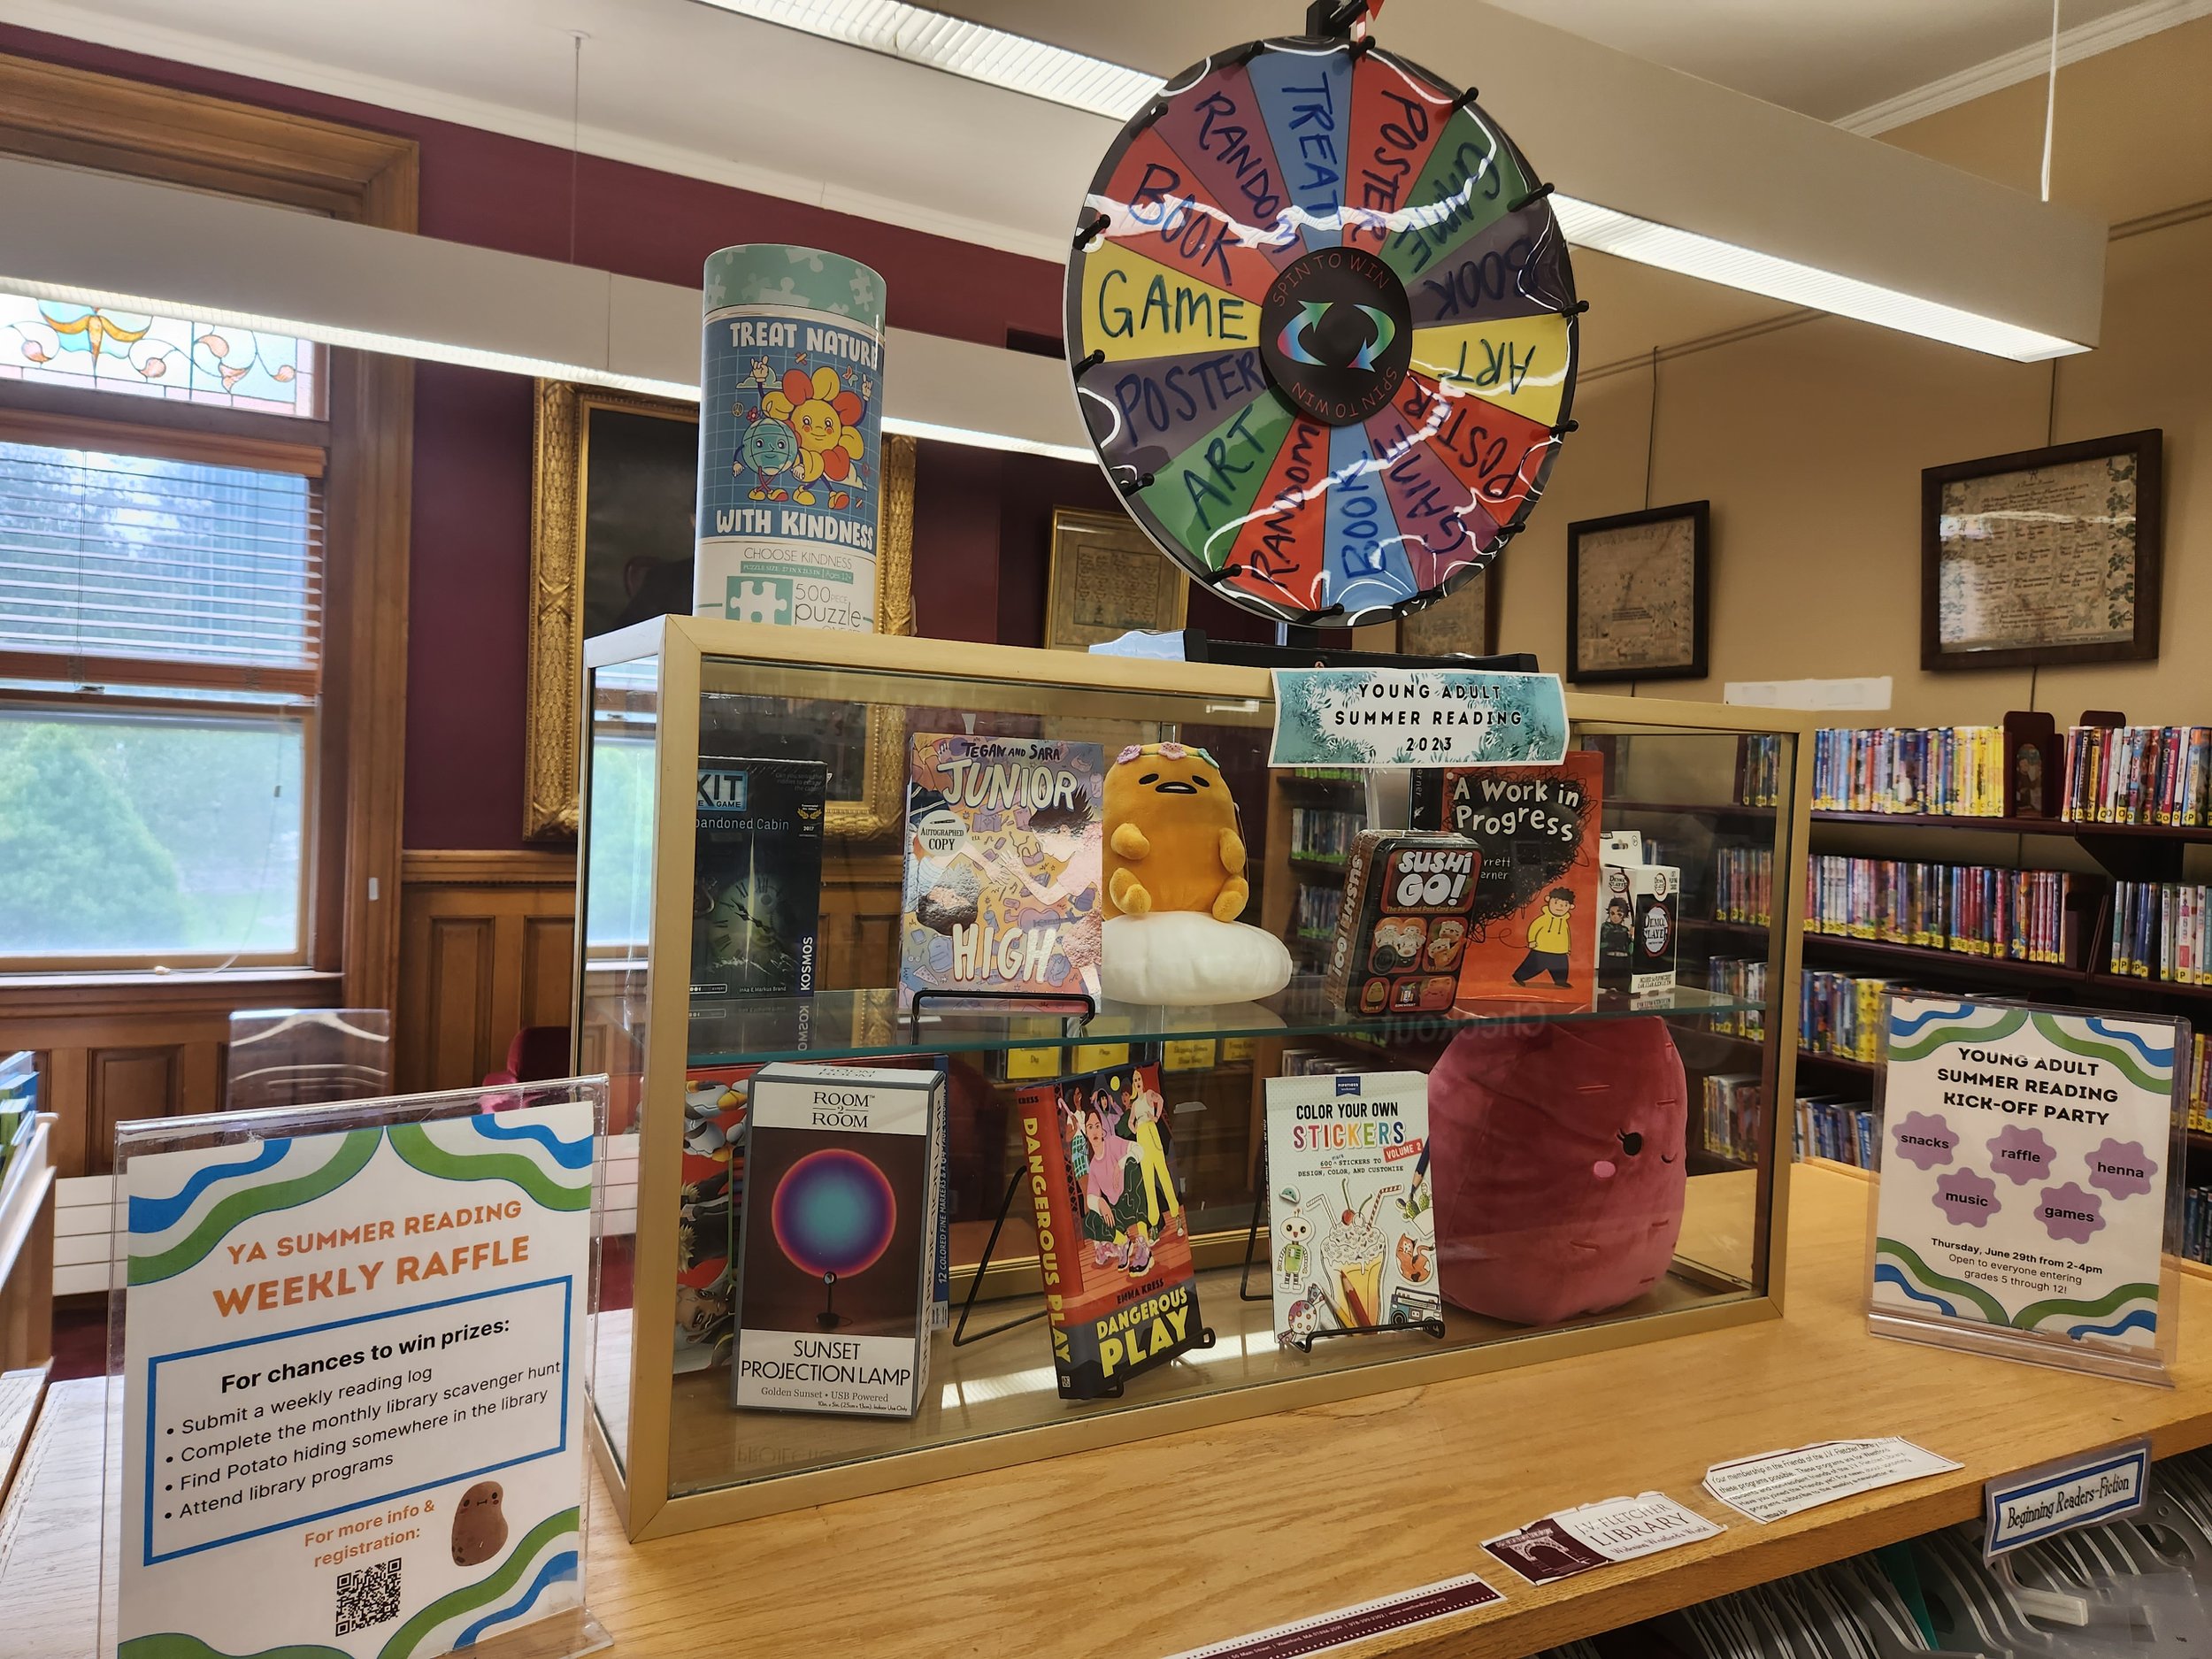 Prize wheel and prizes for participants in the Young Adult summer reading program